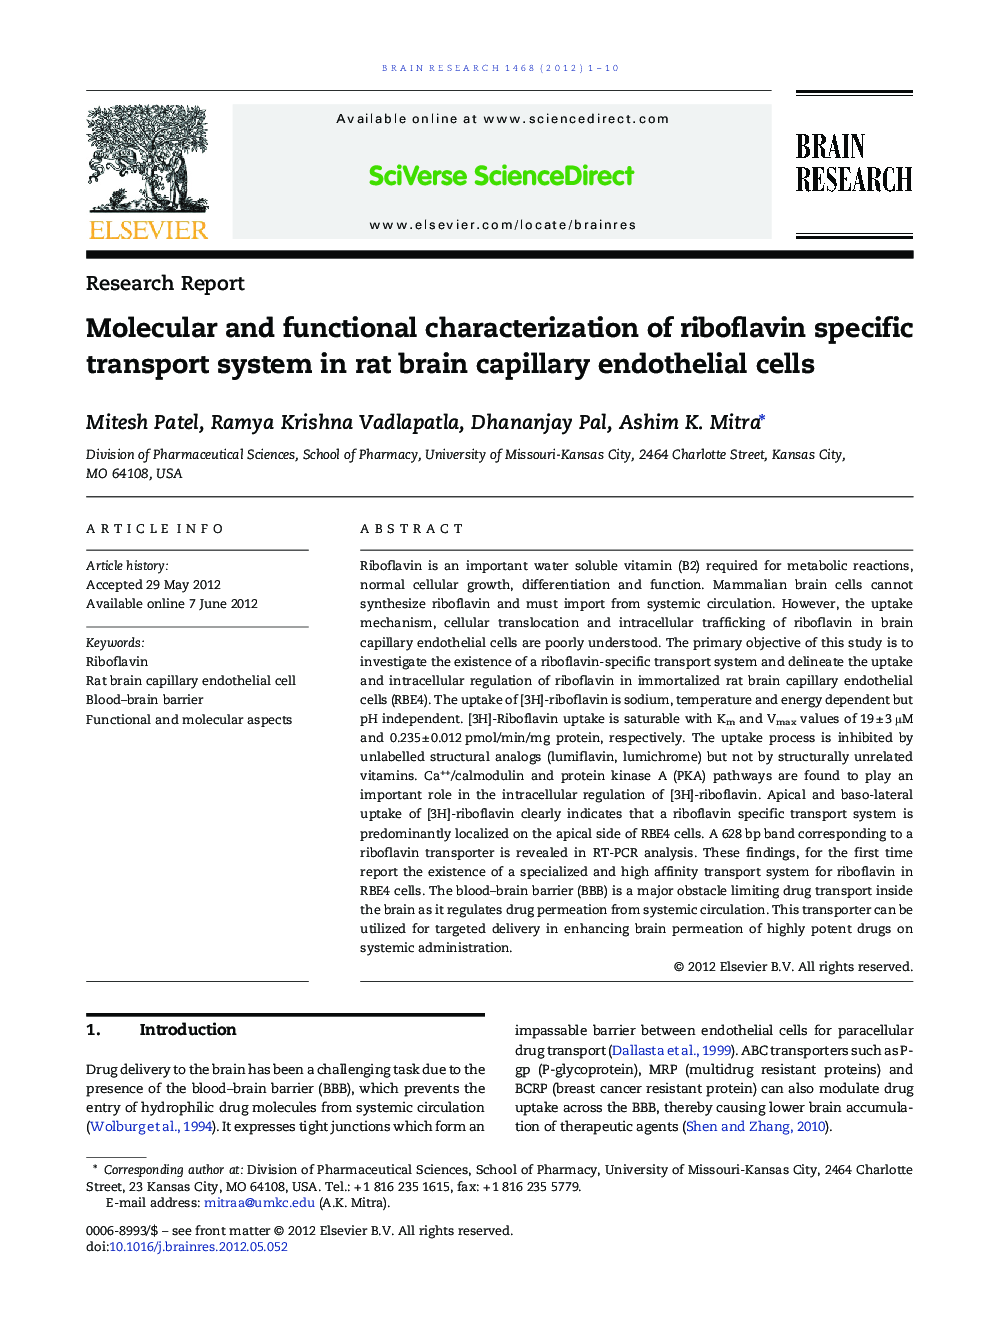 Molecular and functional characterization of riboflavin specific transport system in rat brain capillary endothelial cells